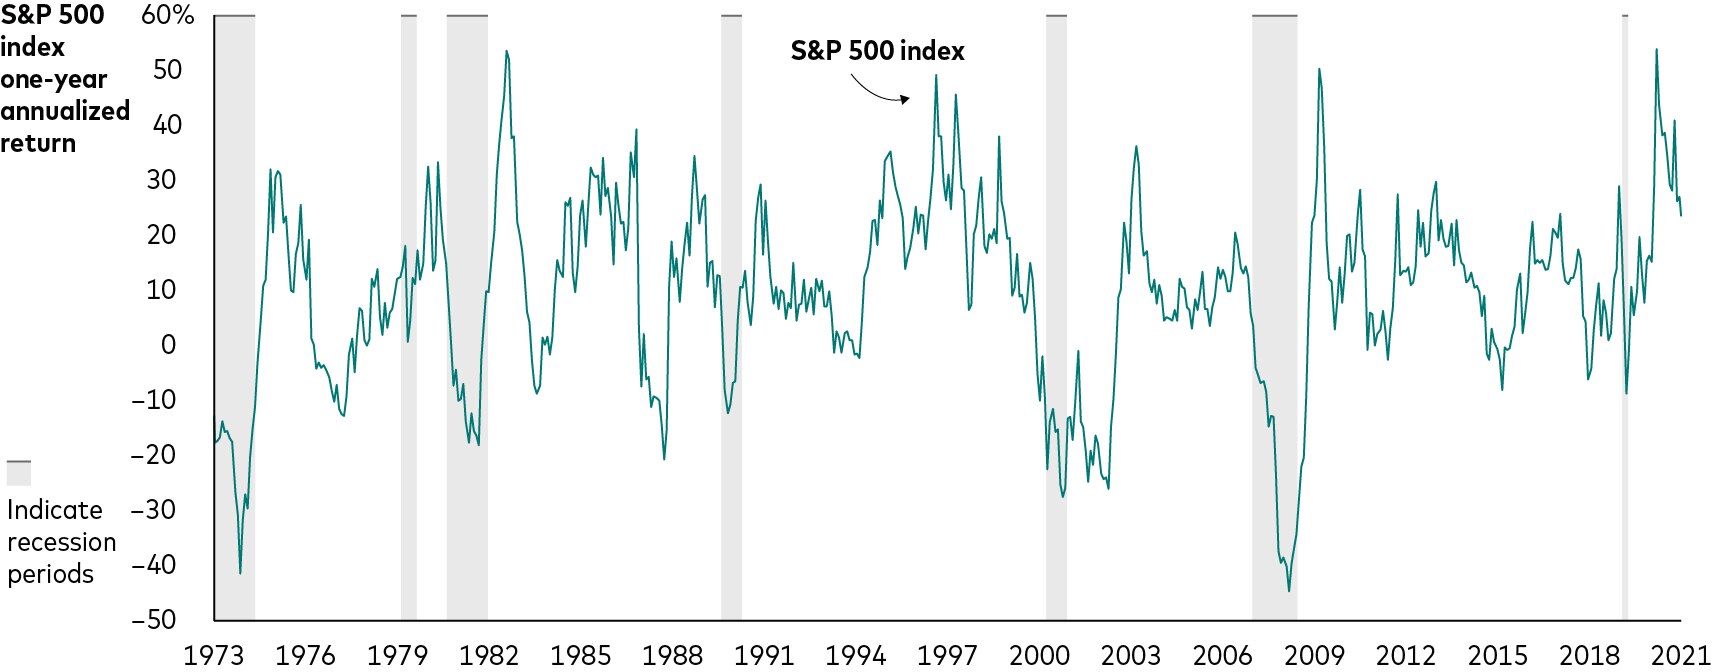 Line chart shows the performance of the S&P 500 Index from 1973 through 2021, including its performance during seven recessions. During the recession that began in November 1973 and ended in February 1975, the S&P 500 Index reached its low toward the end of this period, in September 1974. The next recession lasted six months, from January through June 1980.The S&P reached its low in March, slightly earlier than in the previous recession. The recession that began in July 1981 lasted until October 1982. The low point of the S&P 500 Index occurred relatively late in the period, in July 1982. During the recession that began in July 1990 and extended through February 1991, the S&P 500 Index hit its low in the middle of the period, in October 1990. For the recession that occurred from March through October 2001, the low occurred late in the period, in September. The next recession started in December 2007 and lasted through May 2009. The low for the S&P 500 Index occurred near the end of the period, in February 2009. During the 2020 recession, which lasted only two months, the low occurred during the latter half of the period, in March.